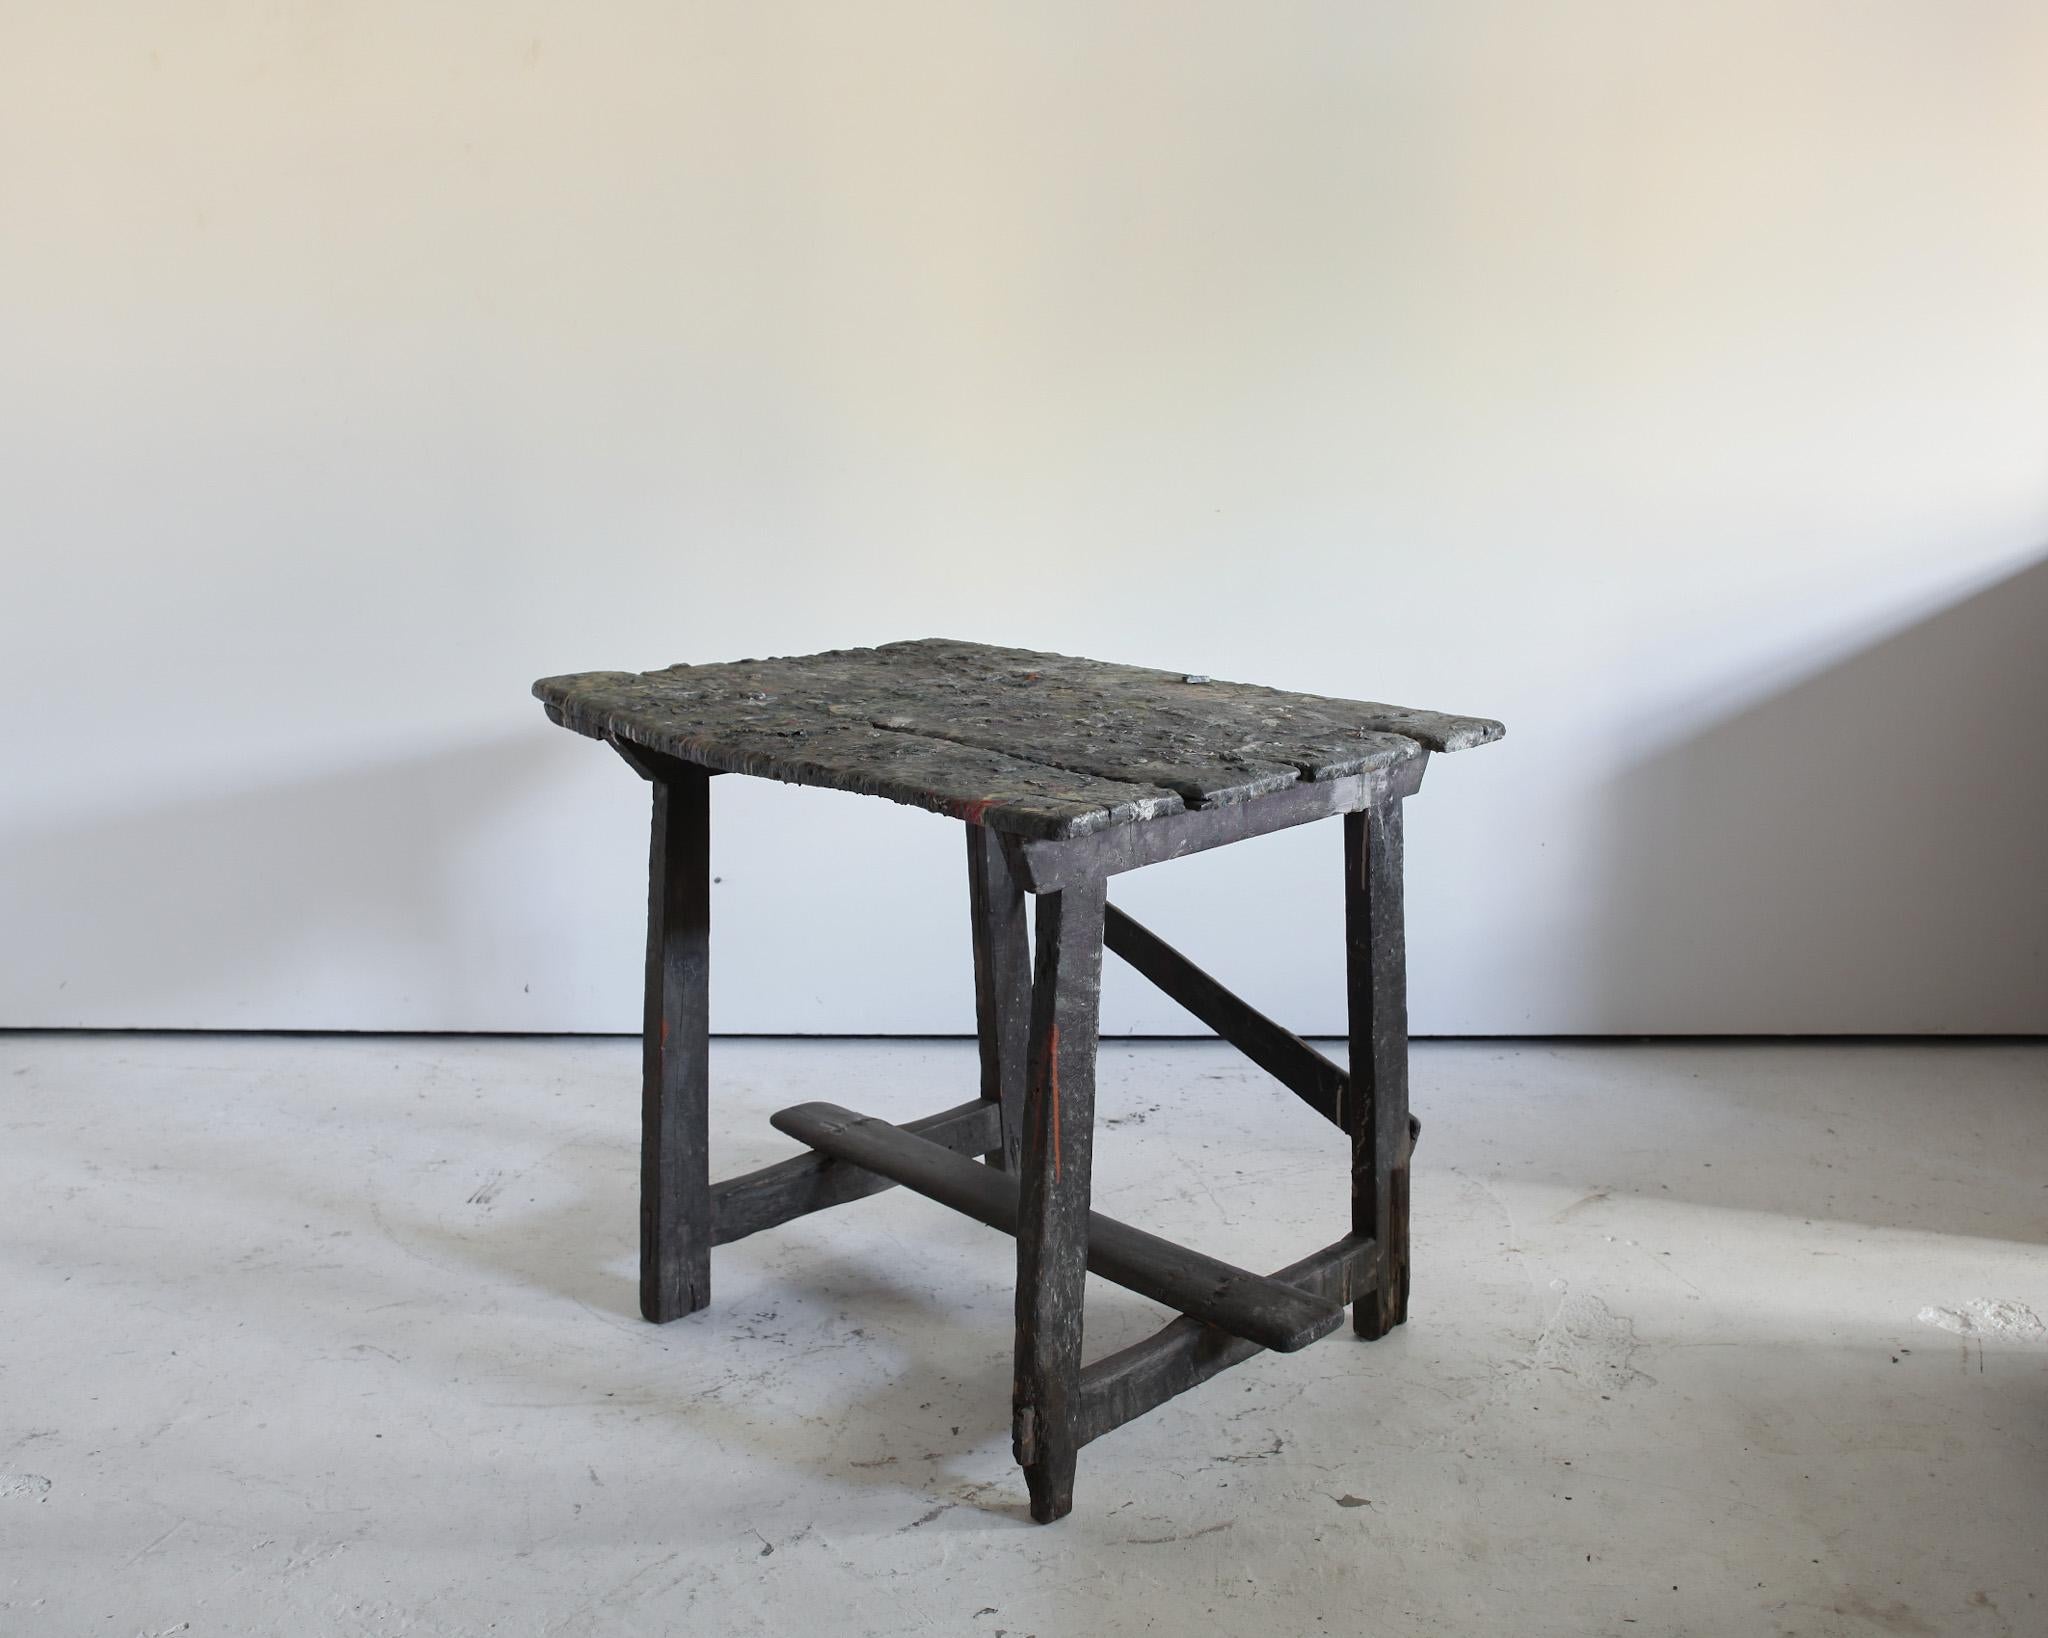 A totally unique 19th C. Catalan desk/side table used for many, many years by an artist from the town of “Olot”.

Heavily worn with multiple decades paint build up.

A work of art in its own right.

Sympathetically restored in our London workshop.